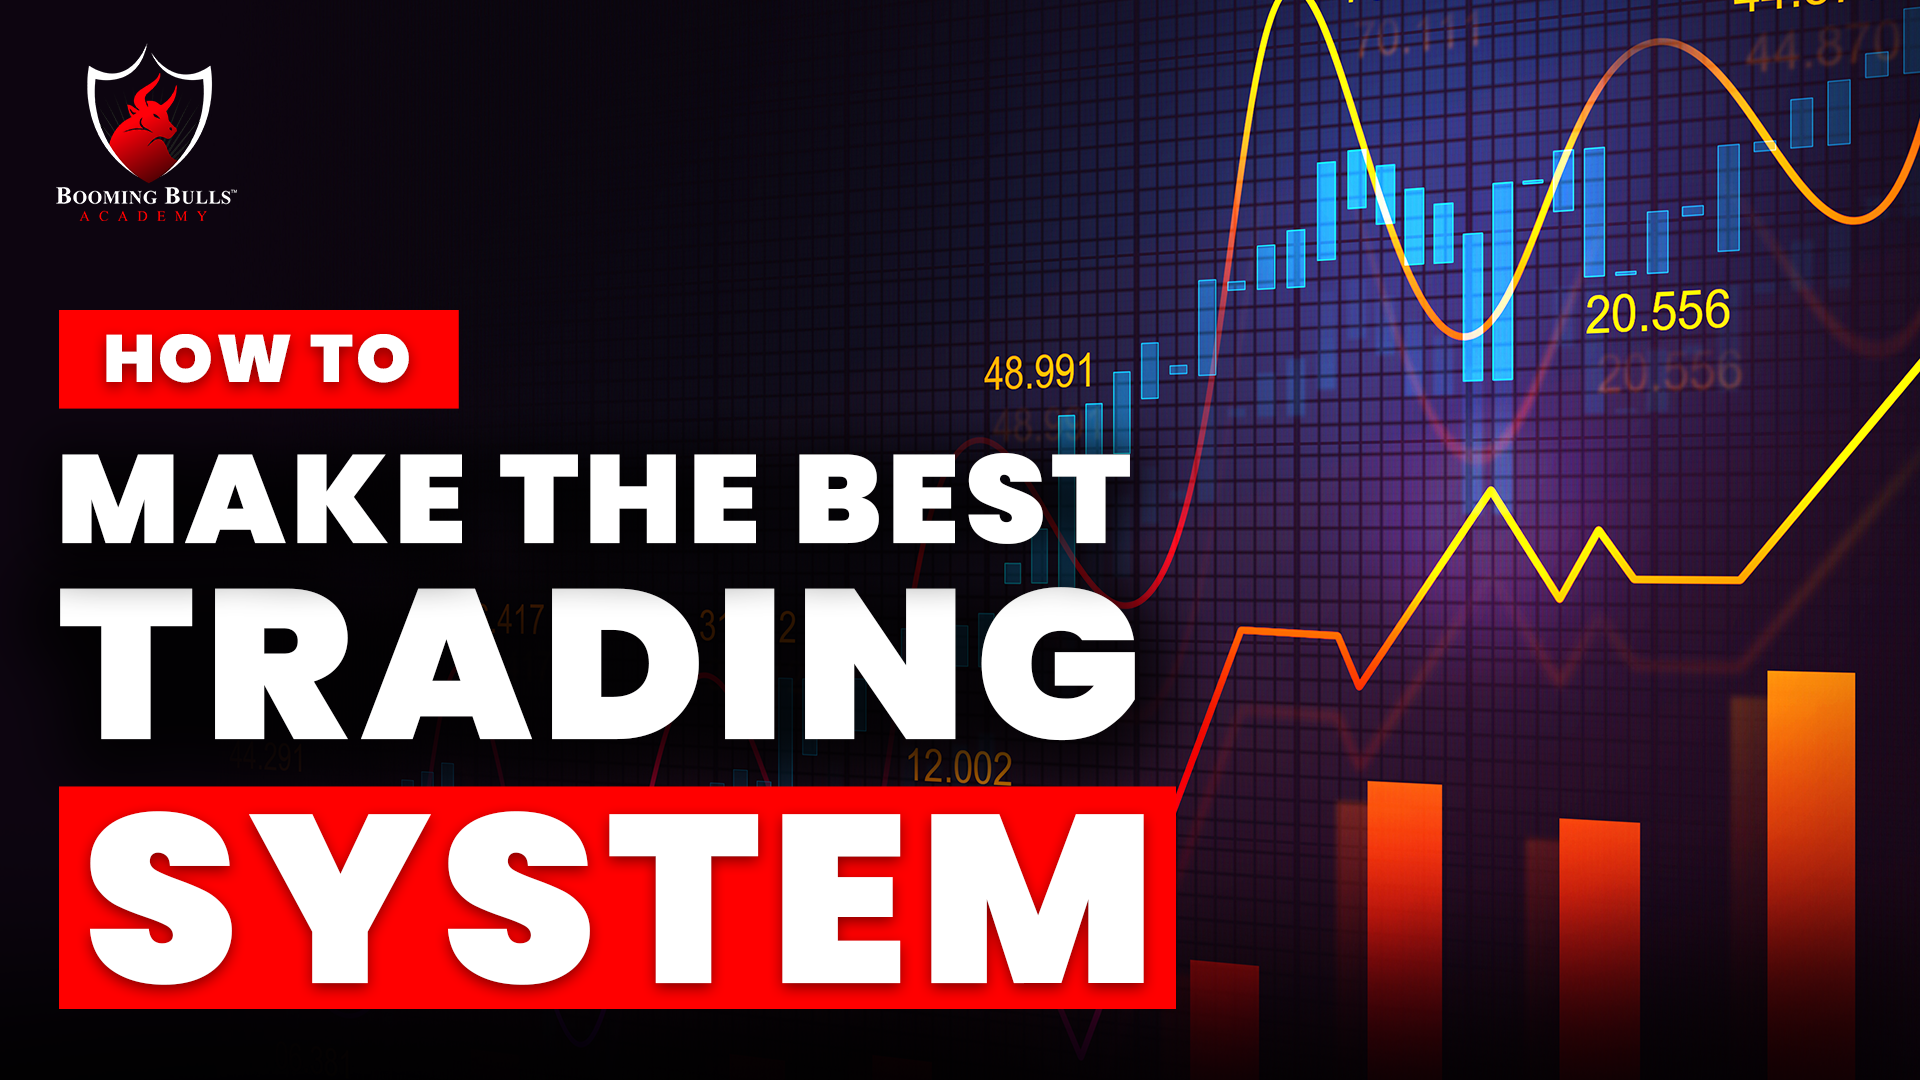 How To Make The Best Trading System